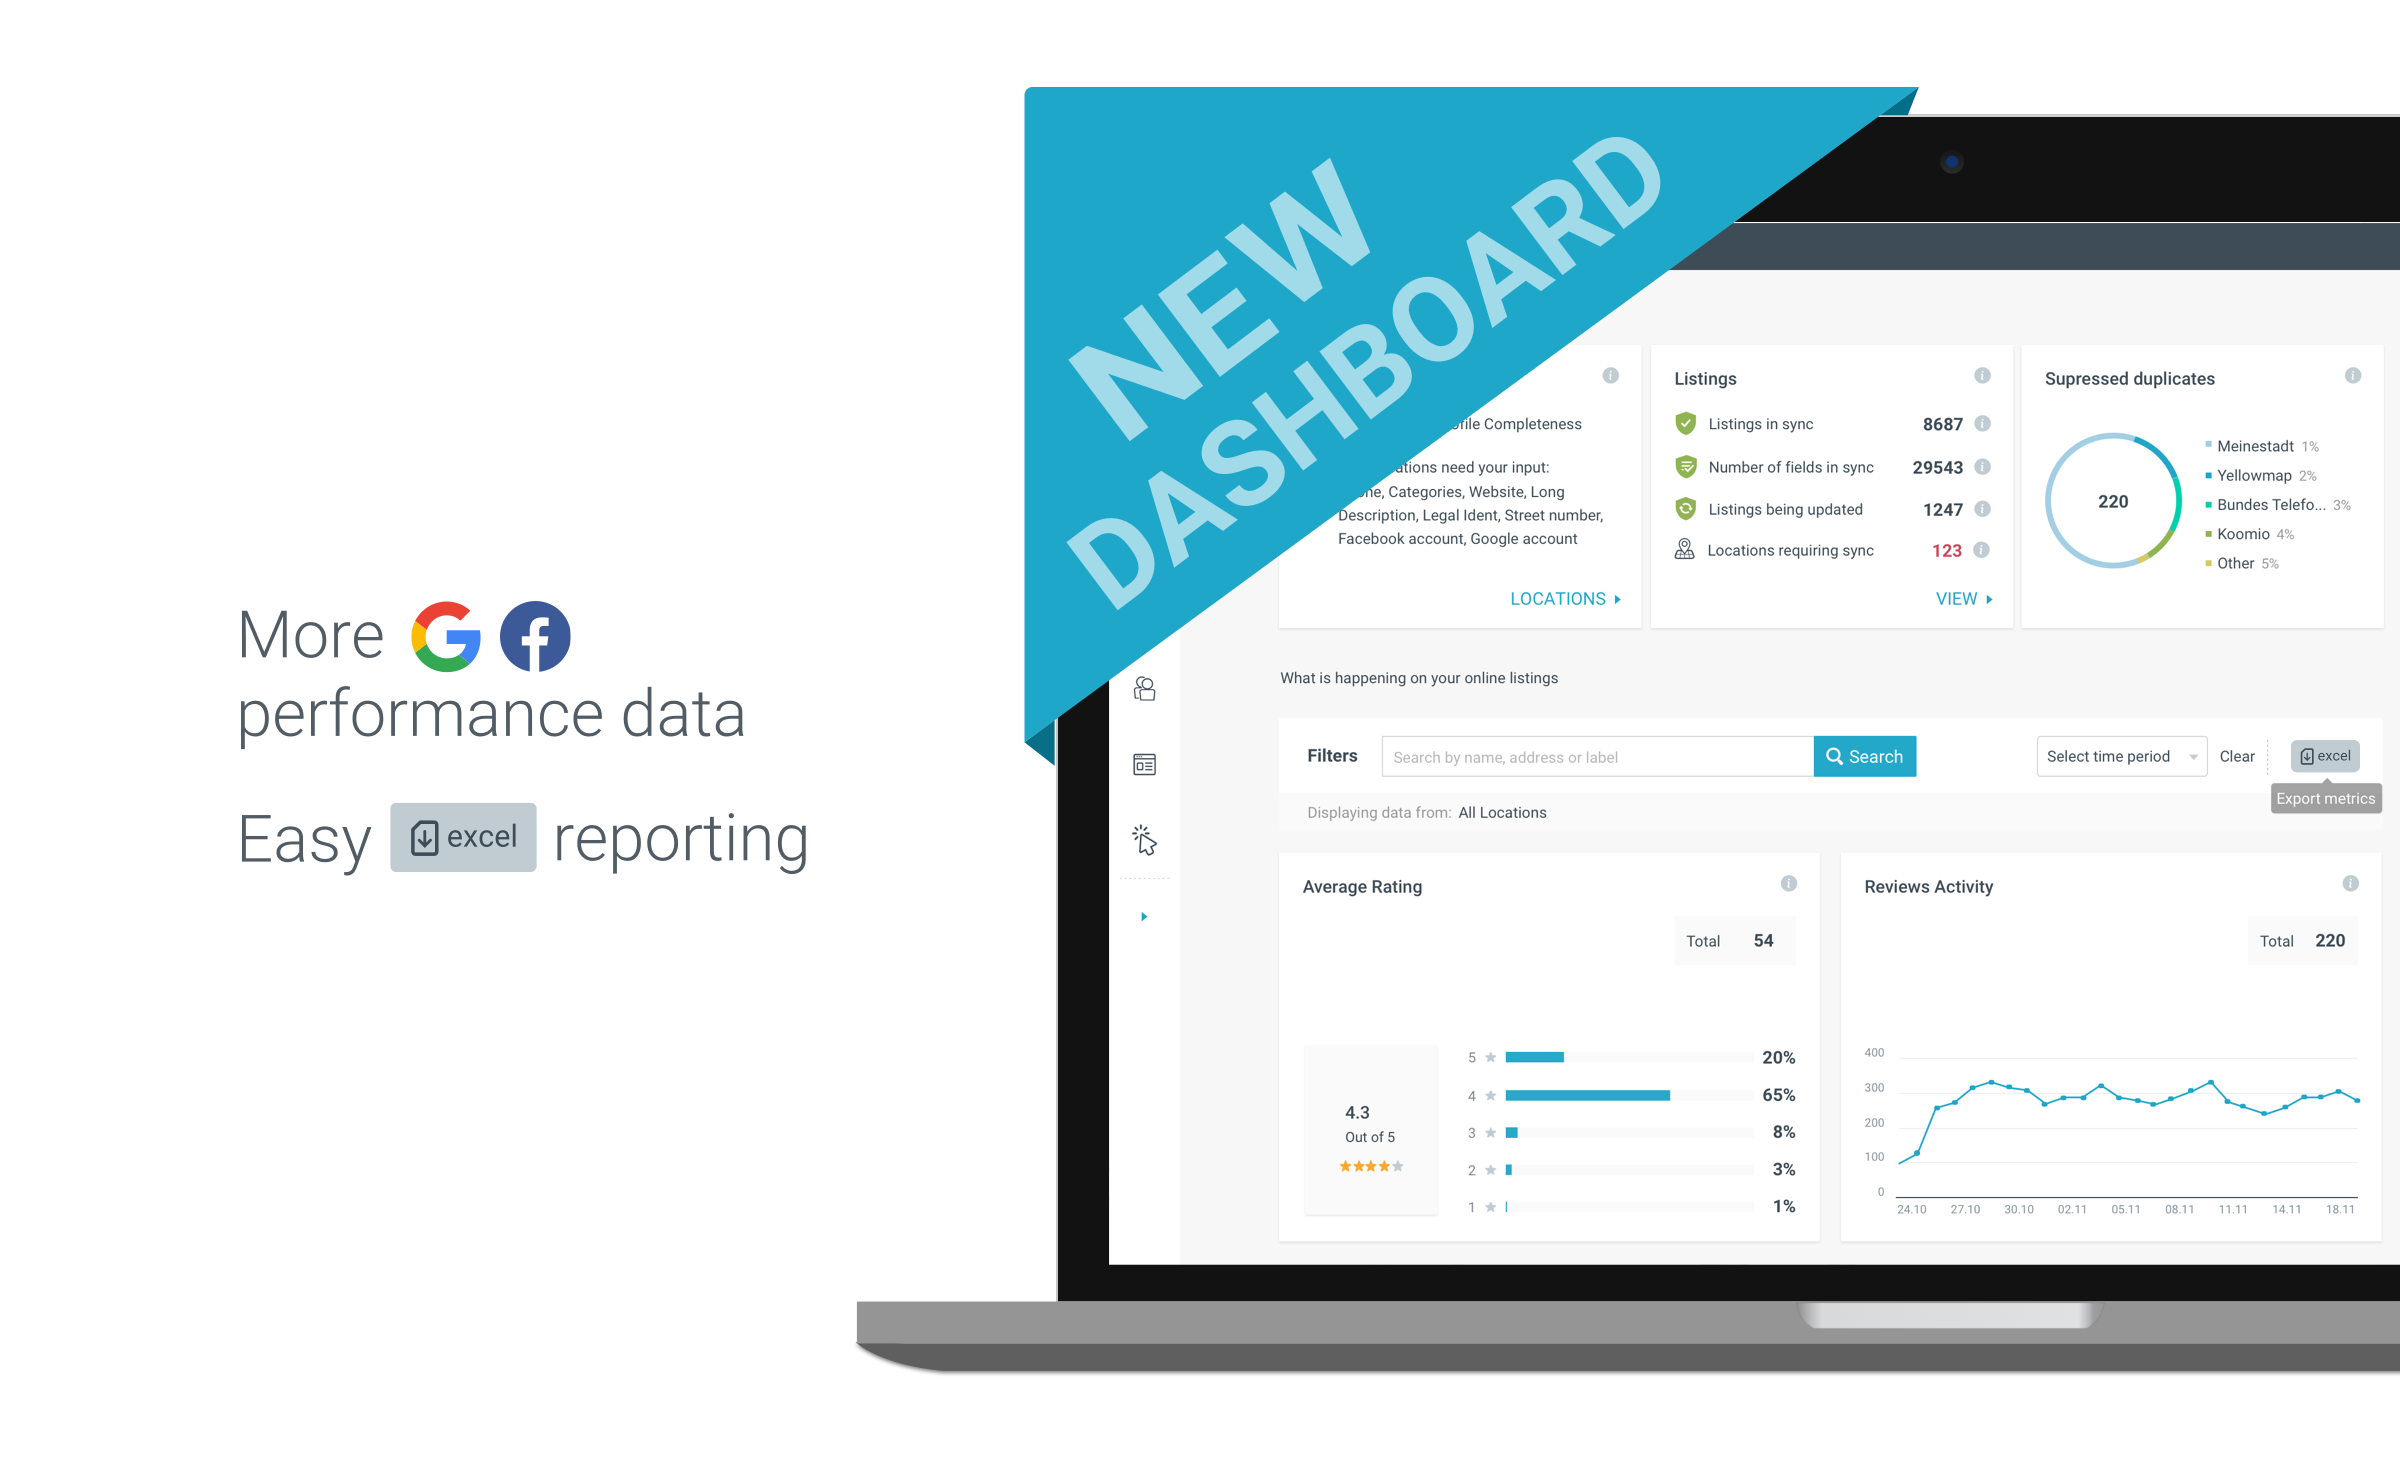 Customized performance reporting from your NEW Uberall Dashboard